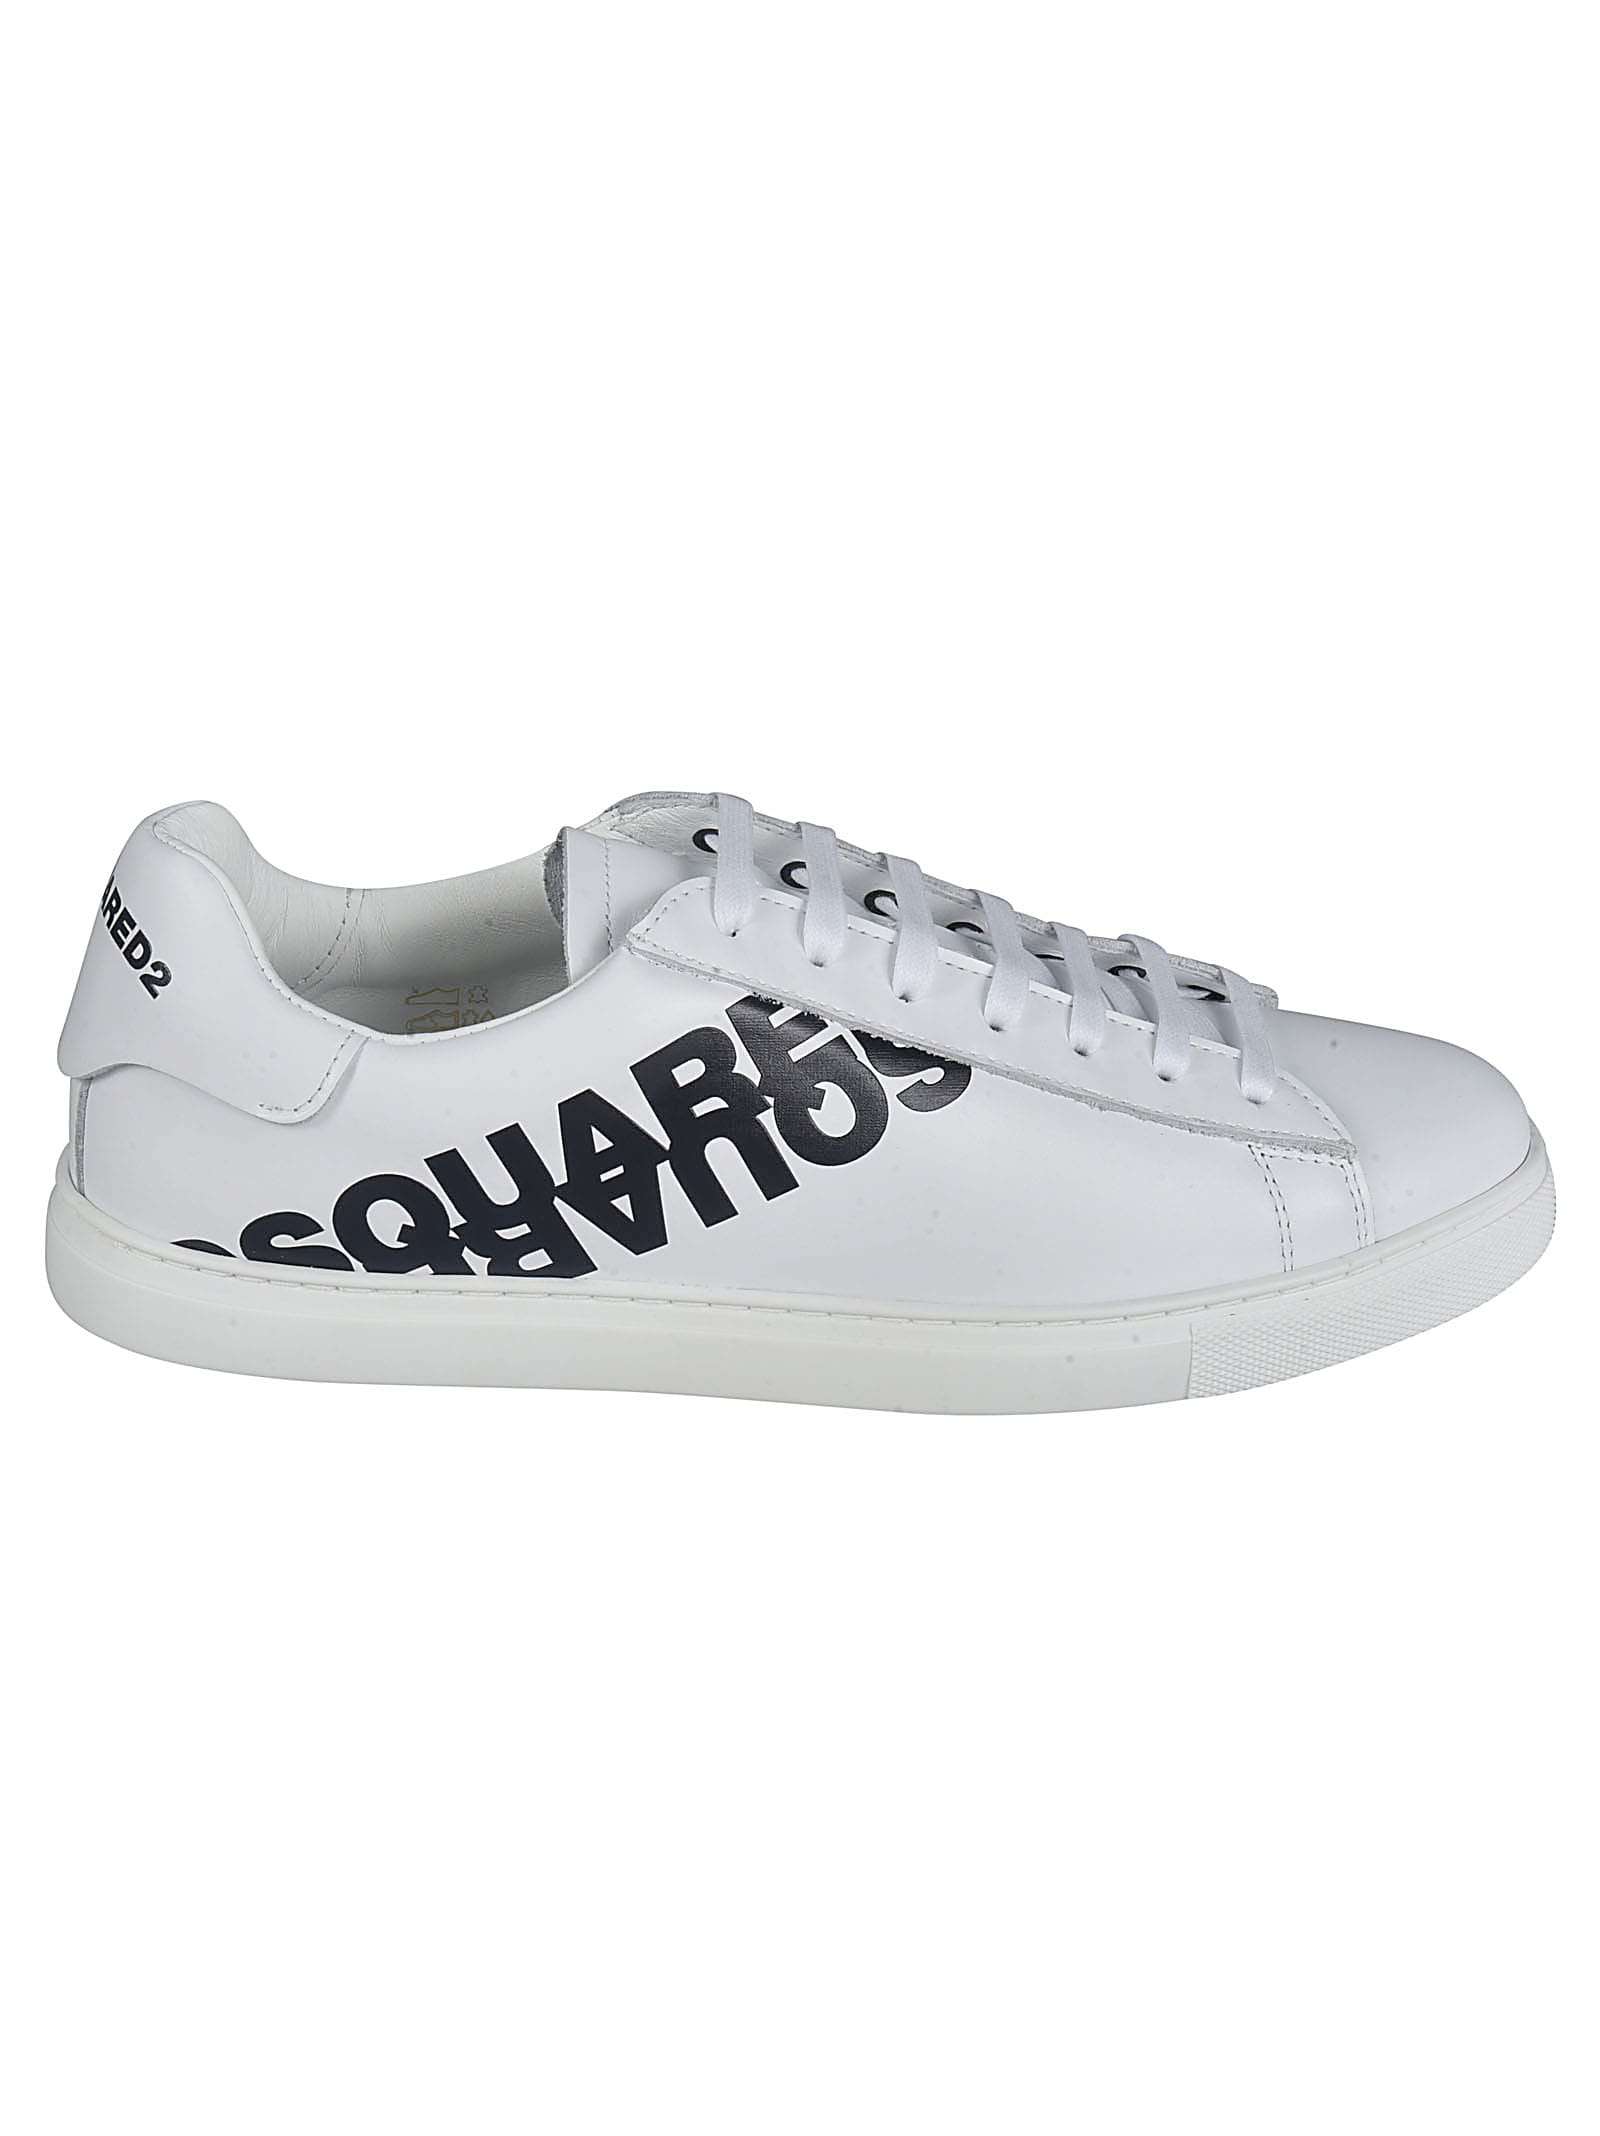 DSQUARED2 REFLECT LOGO TENNIS SNEAKERS,11250292